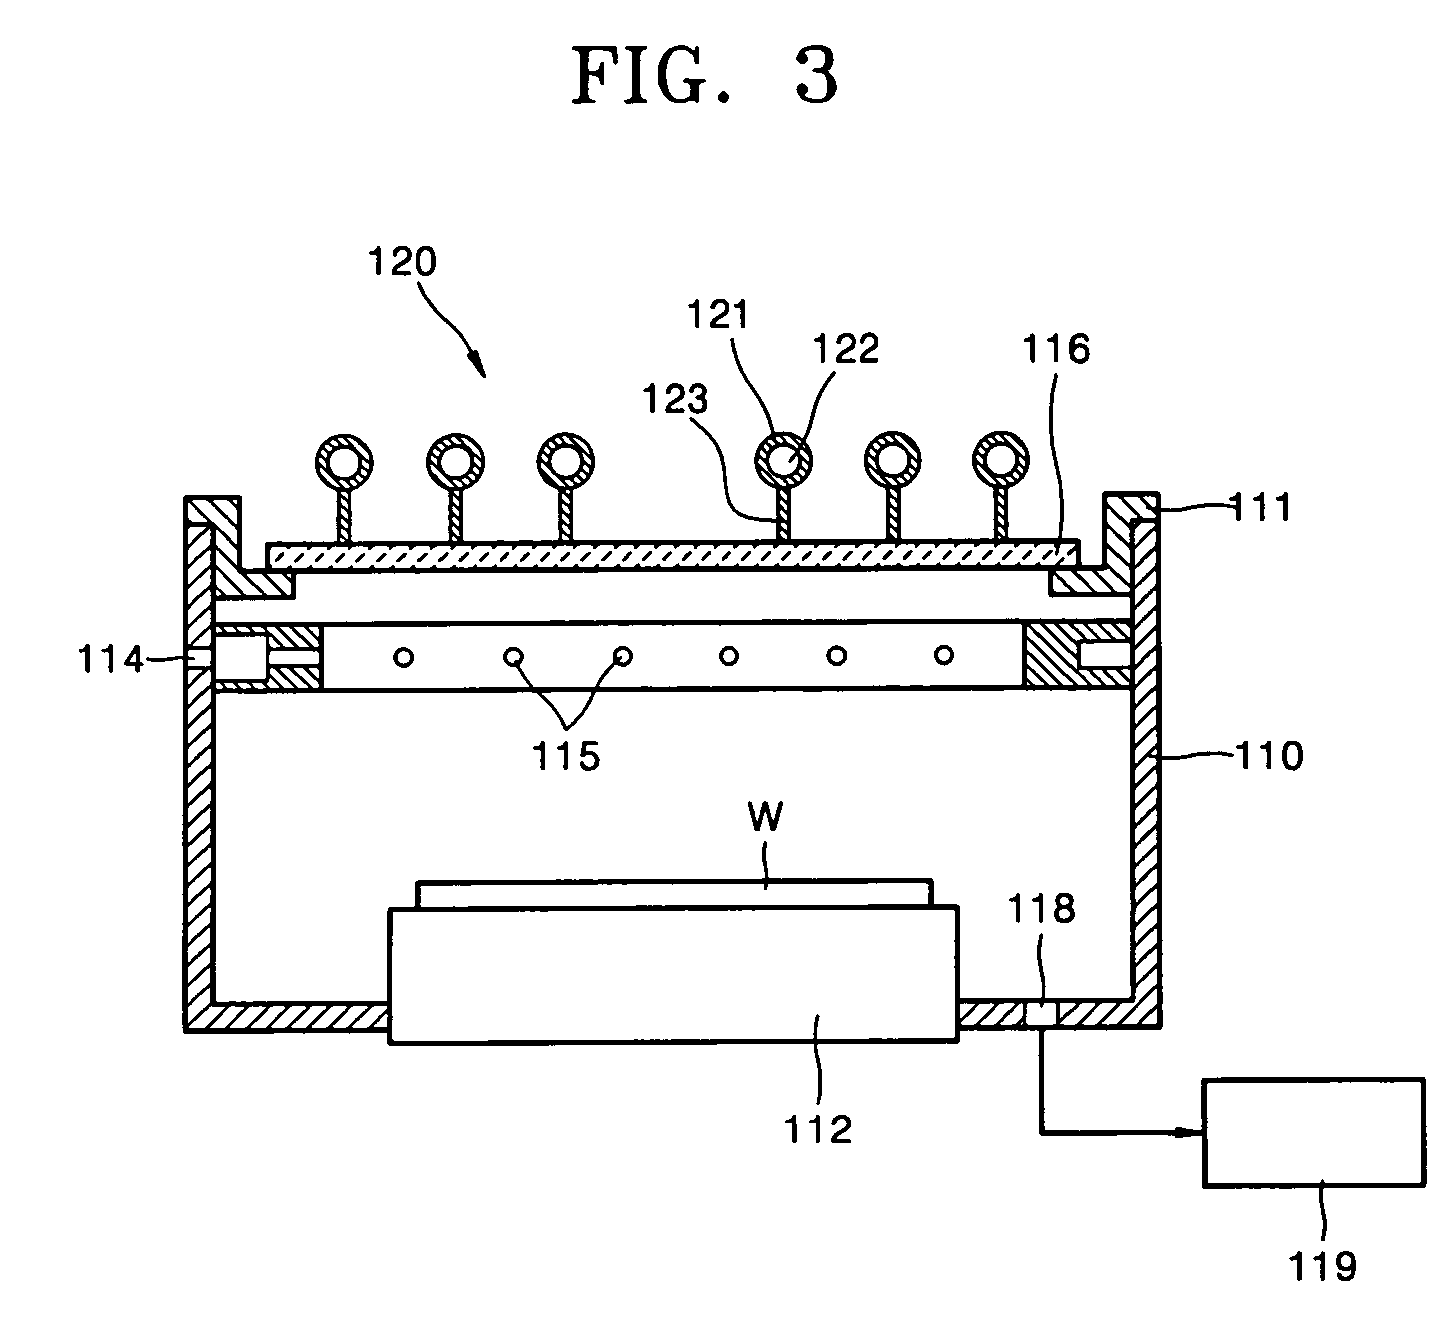 Inductively coupled antenna and plasma processing apparatus using the same